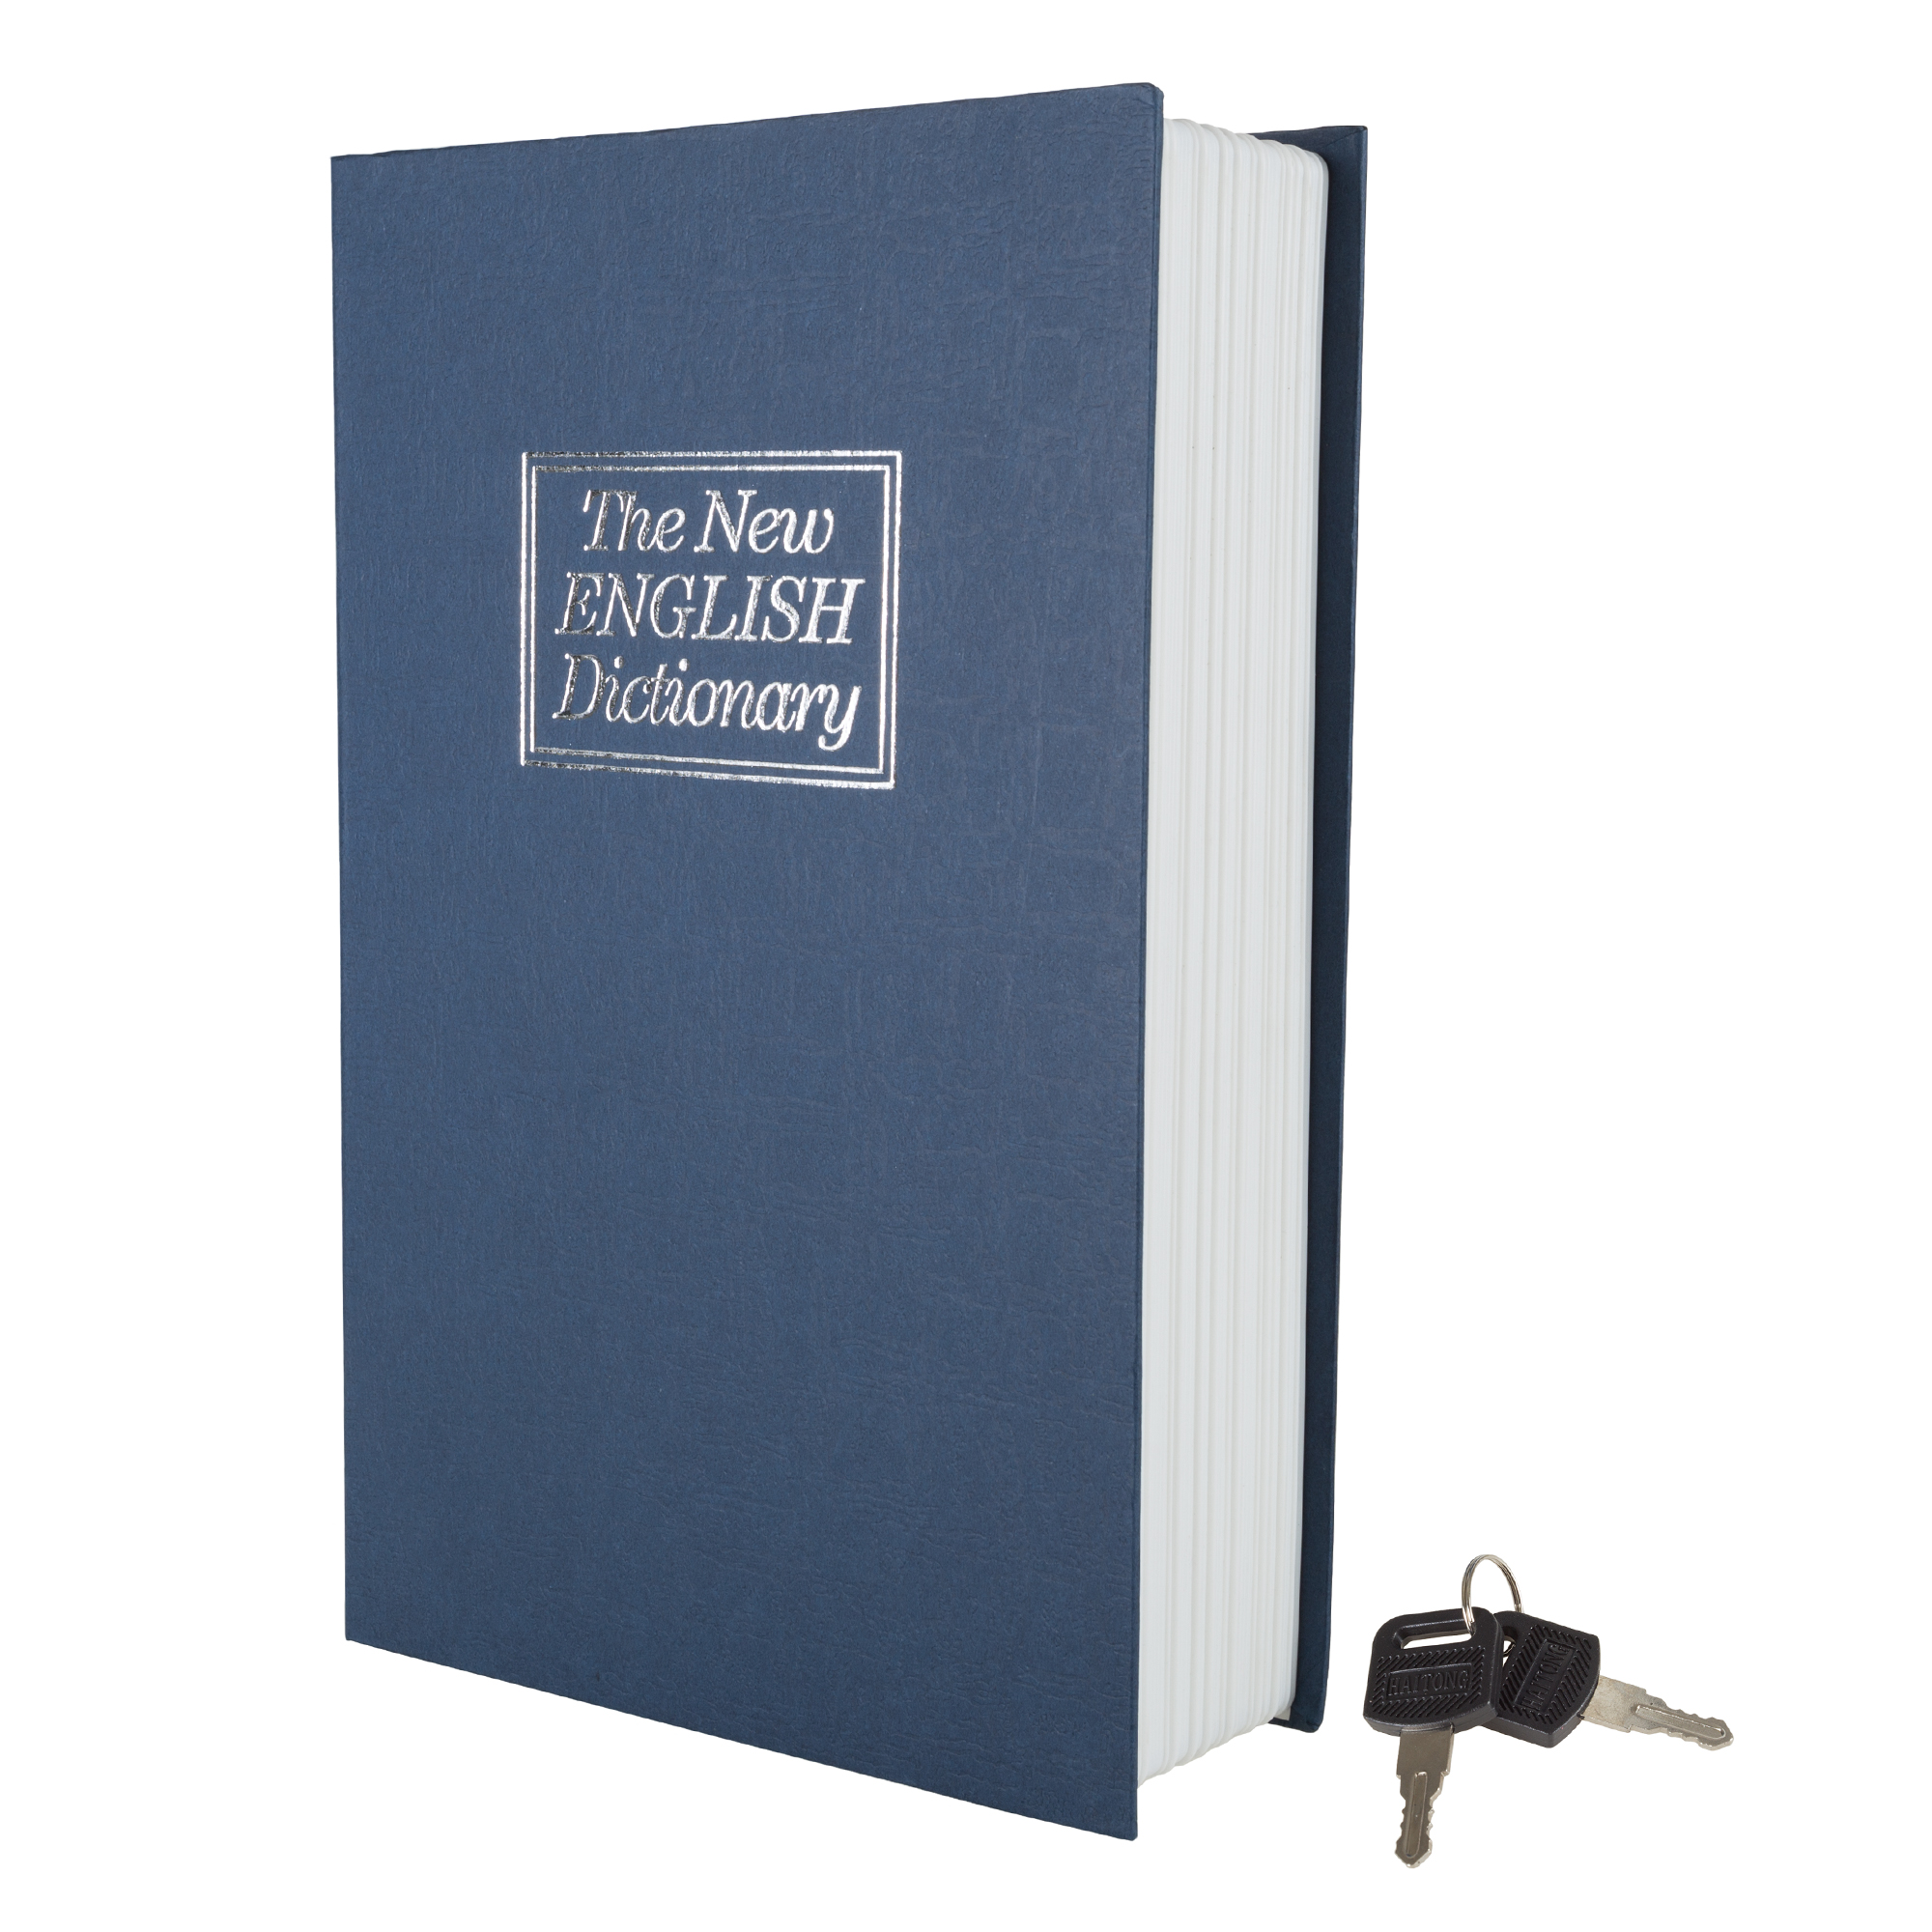 STALWART Diversion Metal Book Safe with Lock and 2 Keys – Portable New English Dictionary Faux Book Lock Box Safe for Cash, Jewelry, Passport and Other Valuables (Blue) - image 1 of 5